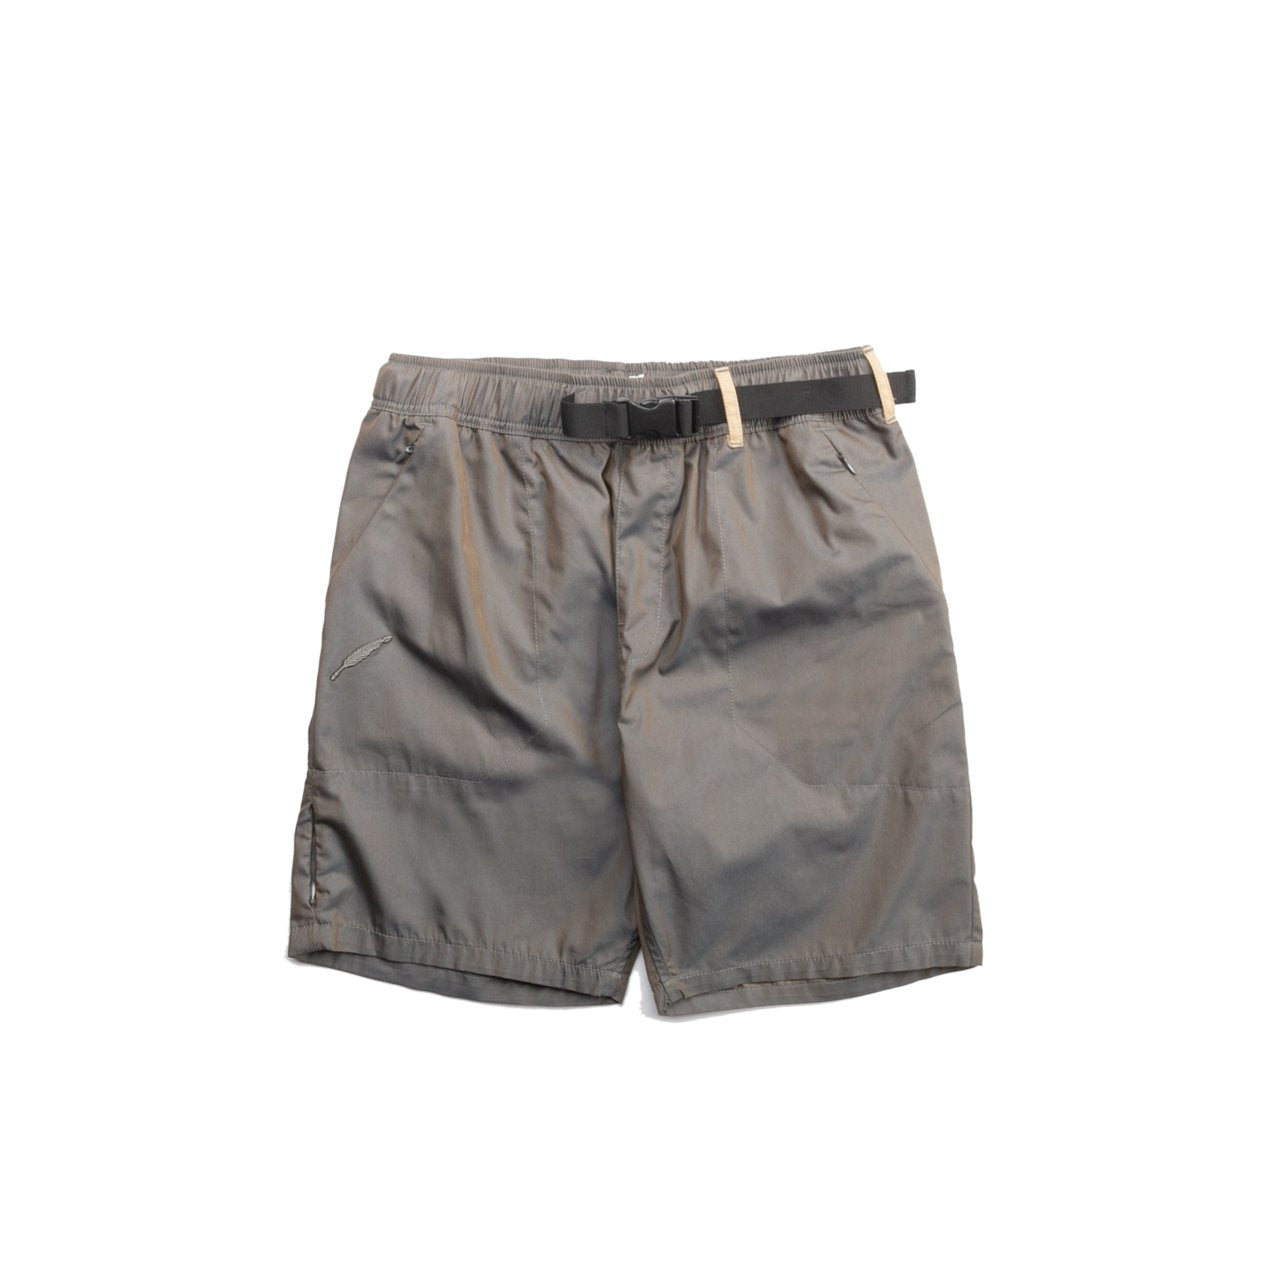 publish brand wilson gray belted shorts - 8586